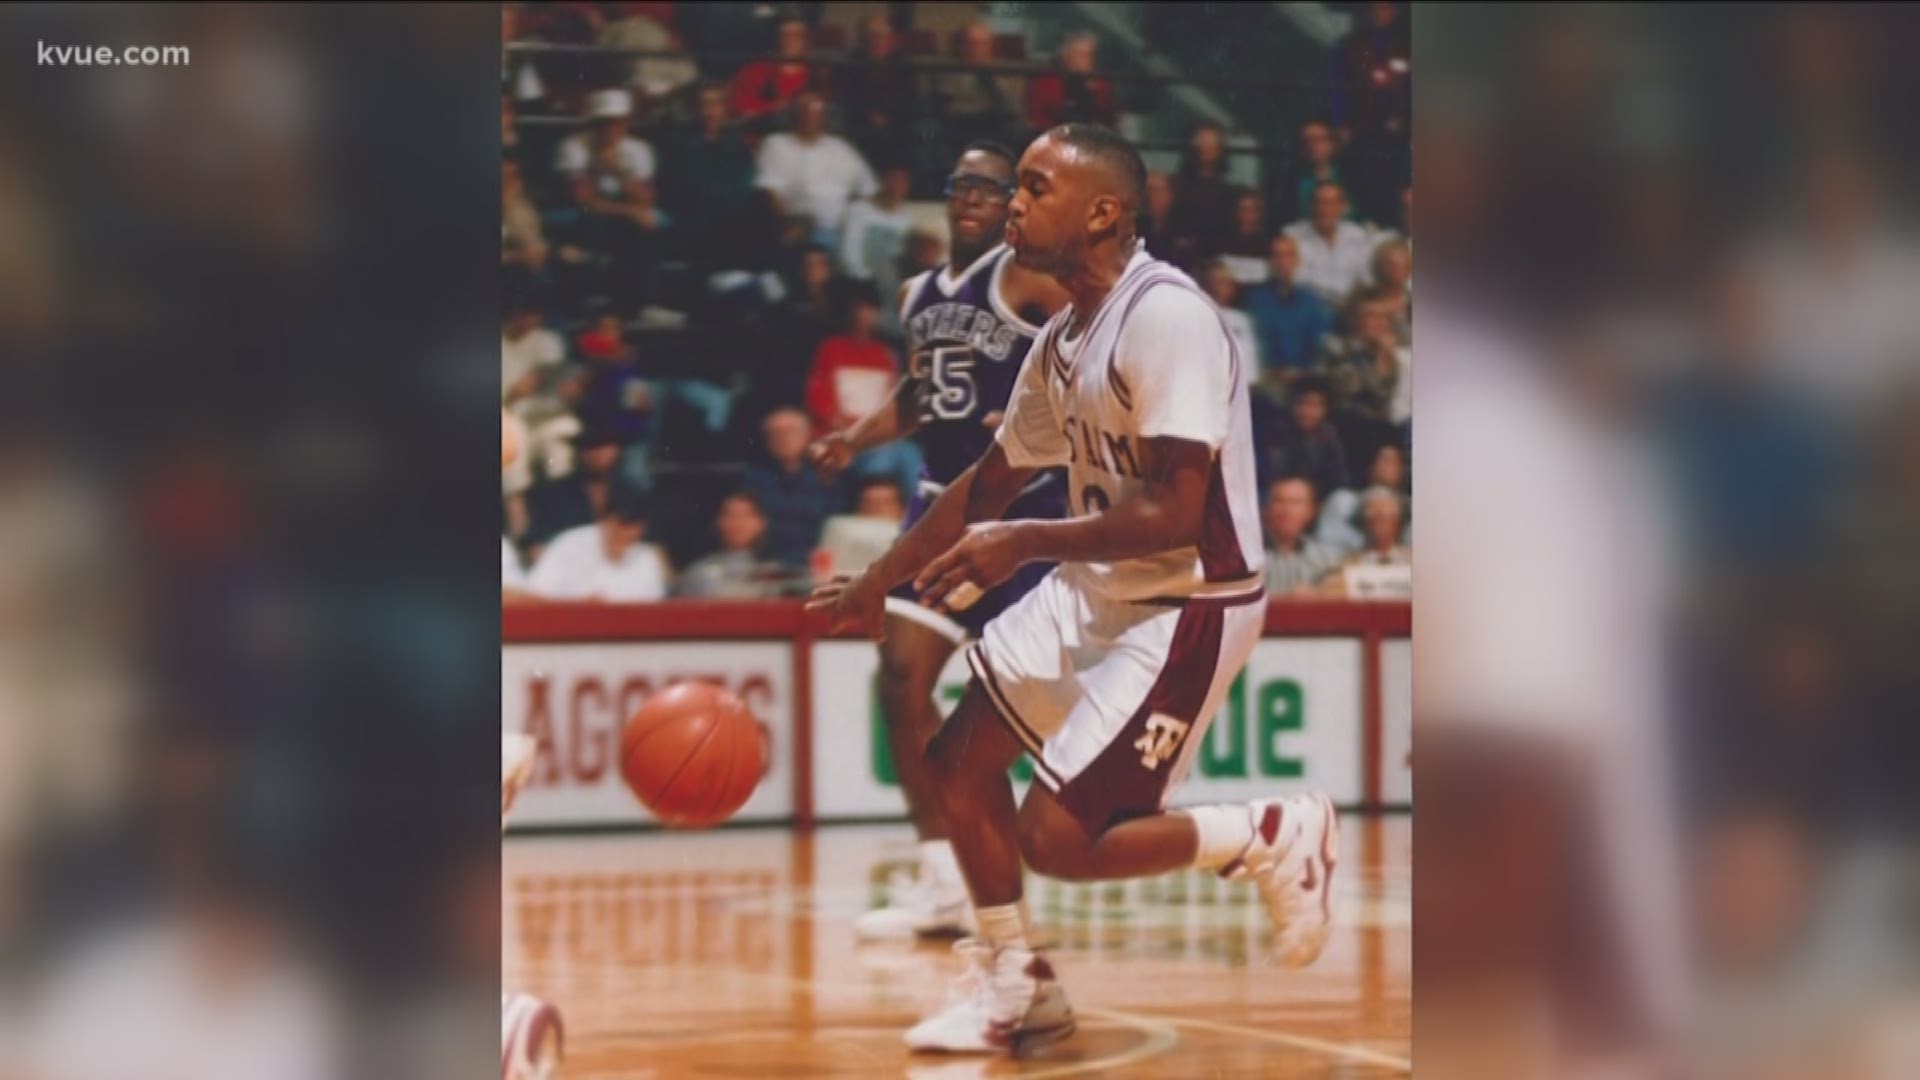 David Edwards, the all-time assists leader in Texas A&M men's basketball history, died of coronavirus.